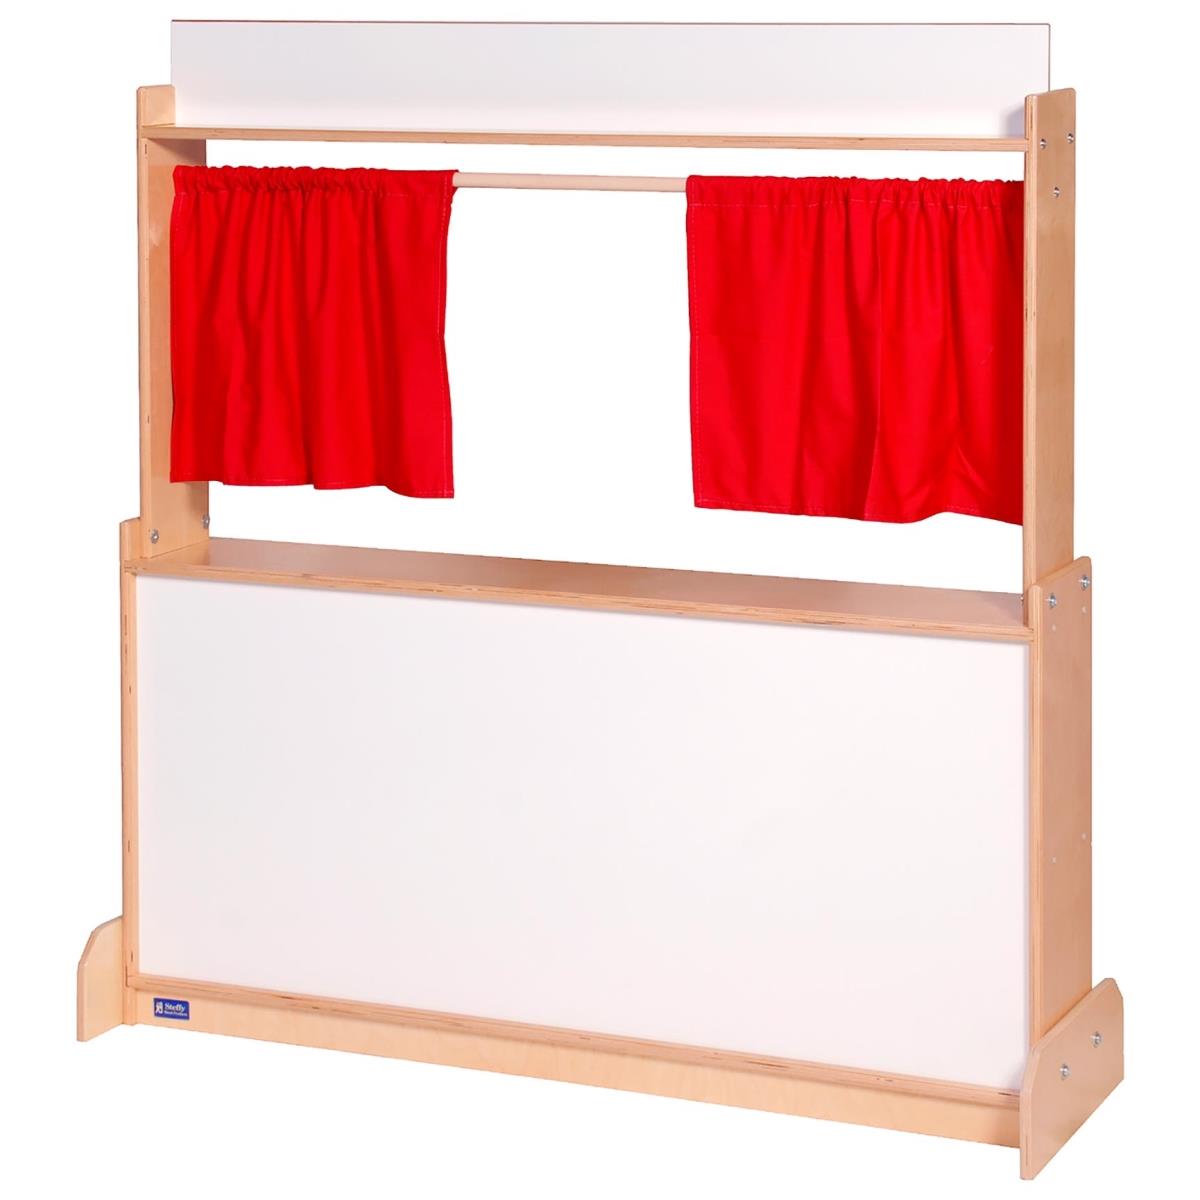 Picture of Angeles ANG1037W Brich Puppet Theatre Store - Dry Erase - 8 x 28 x 48 in.